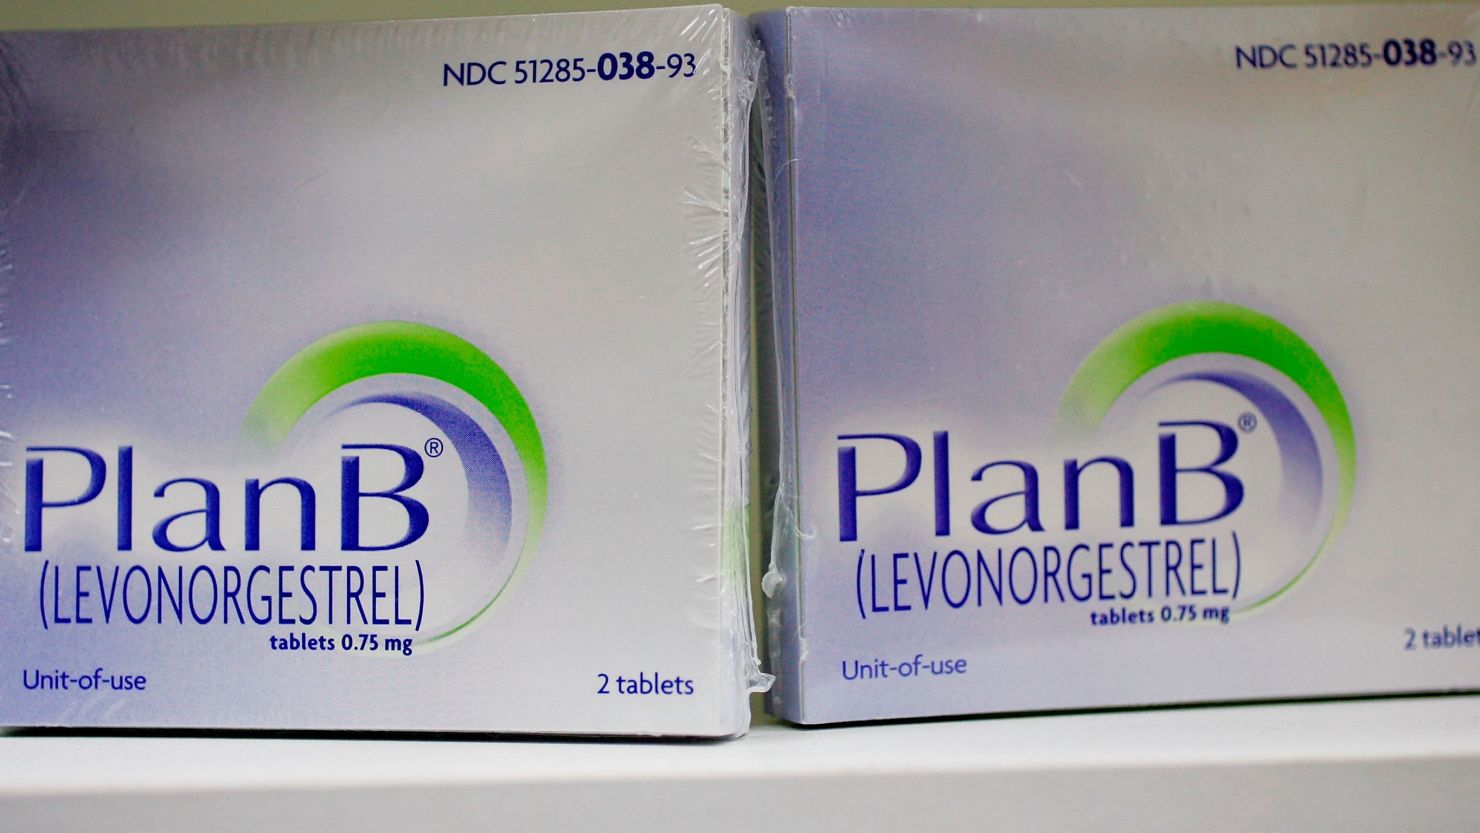 New York City will expand its birth control program in some high schools with the Plan B pill, also known as the 'morning after' pill.